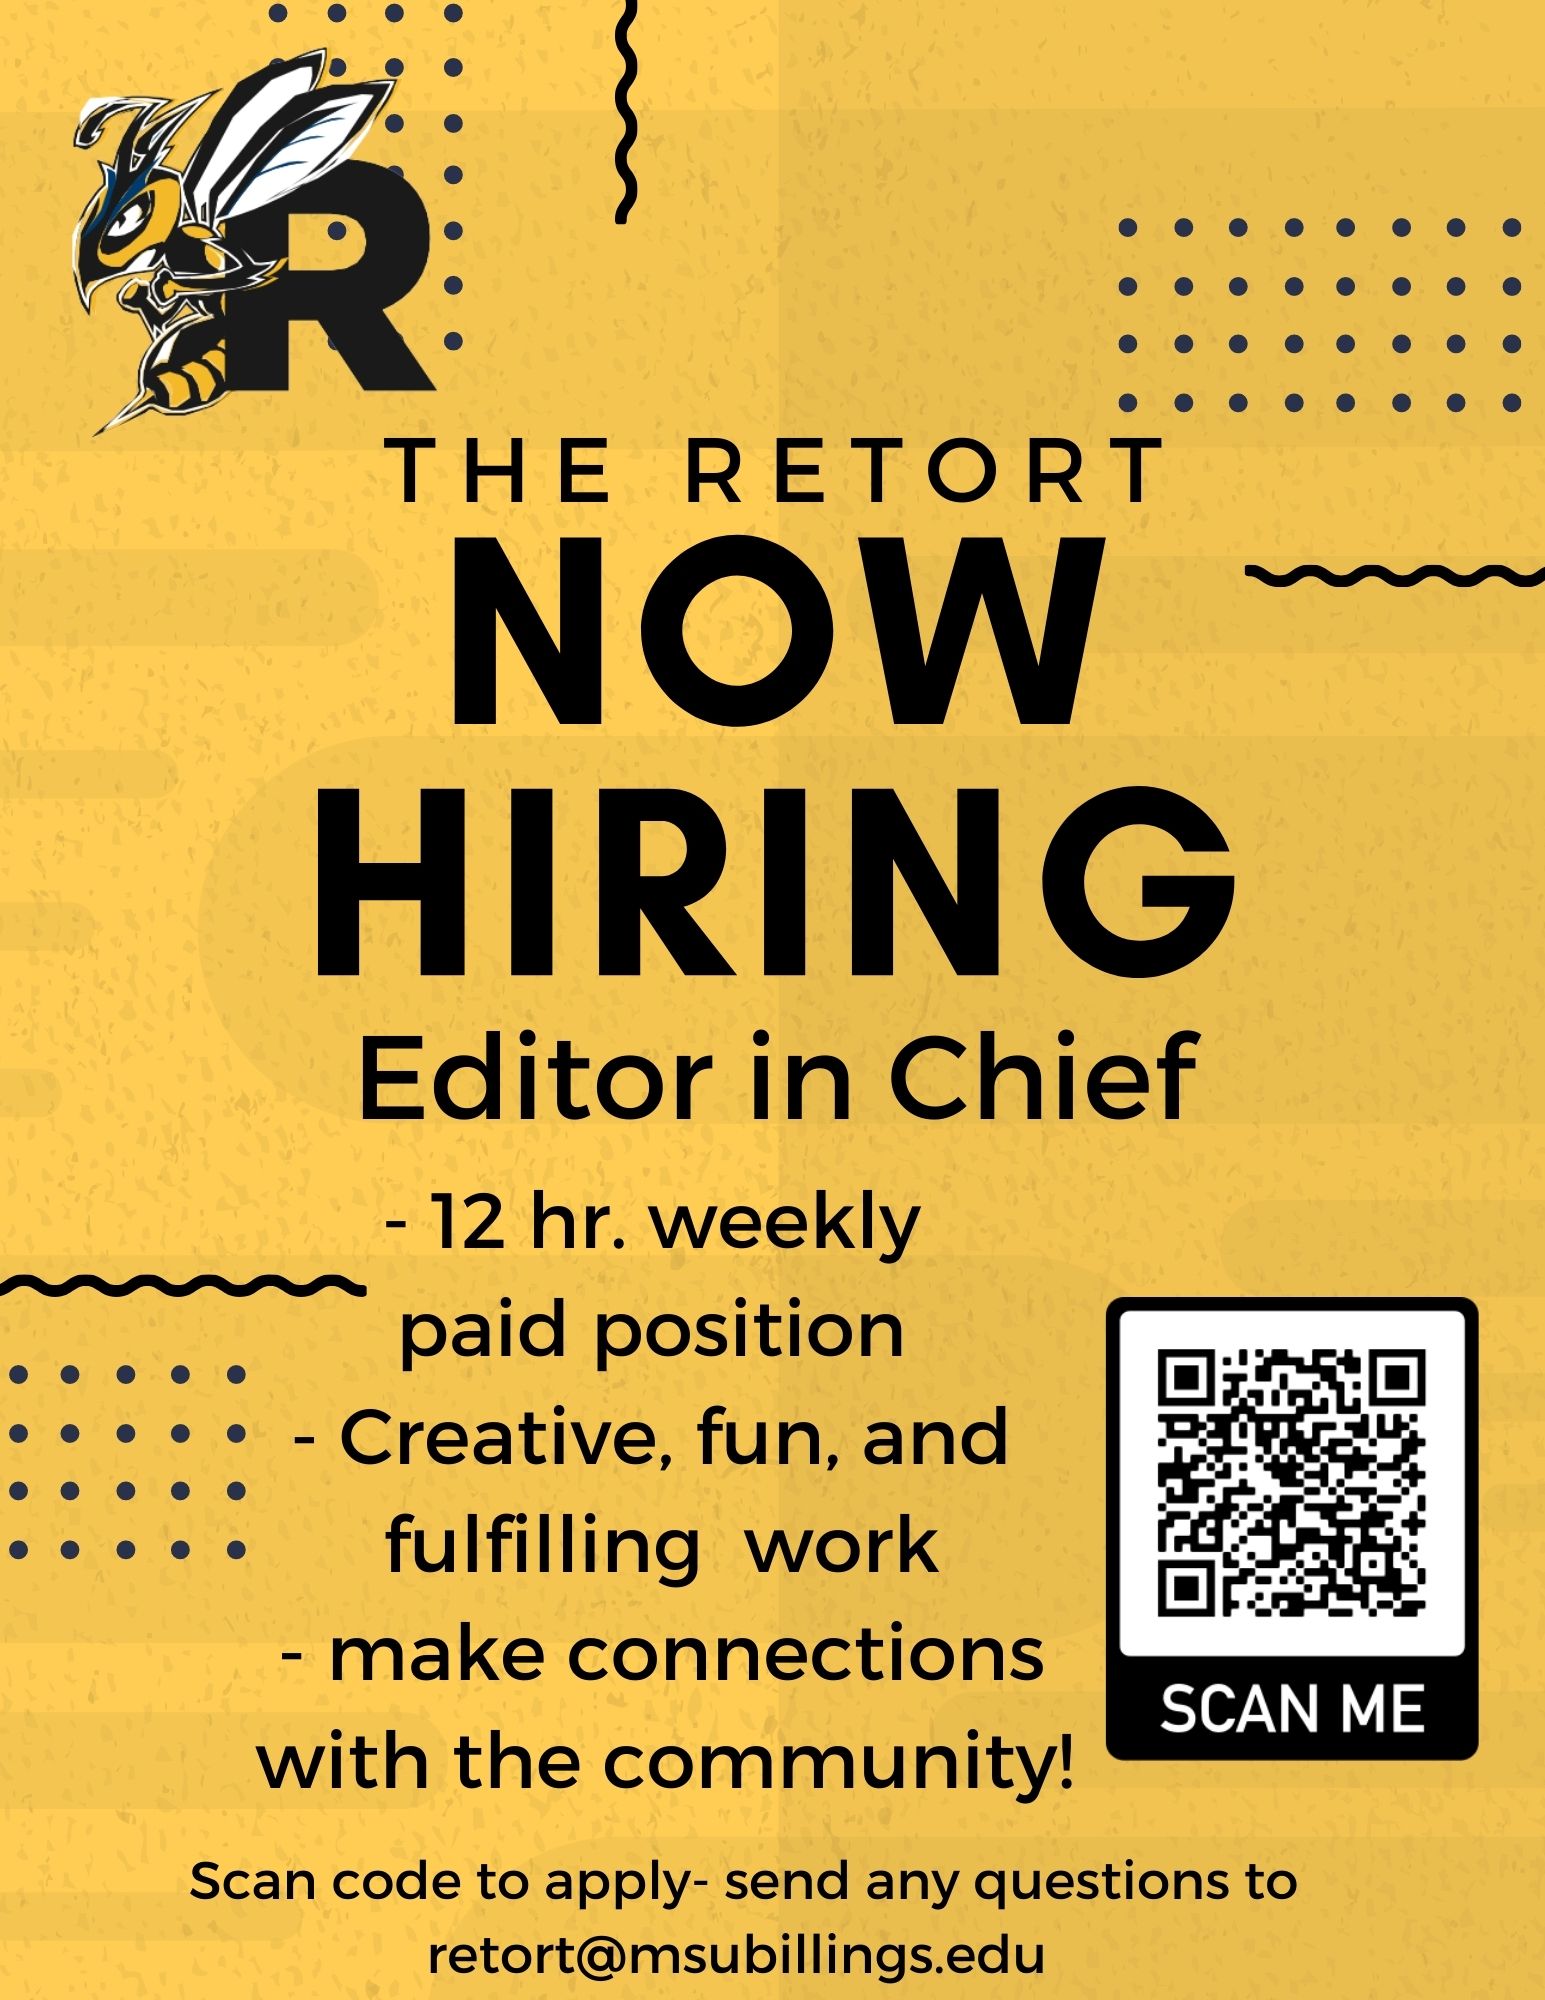 The Retort, now hiring Editor in Chief - 12 hr. weekly paid position, creative, fun and fulfilling work, make connections with the community!